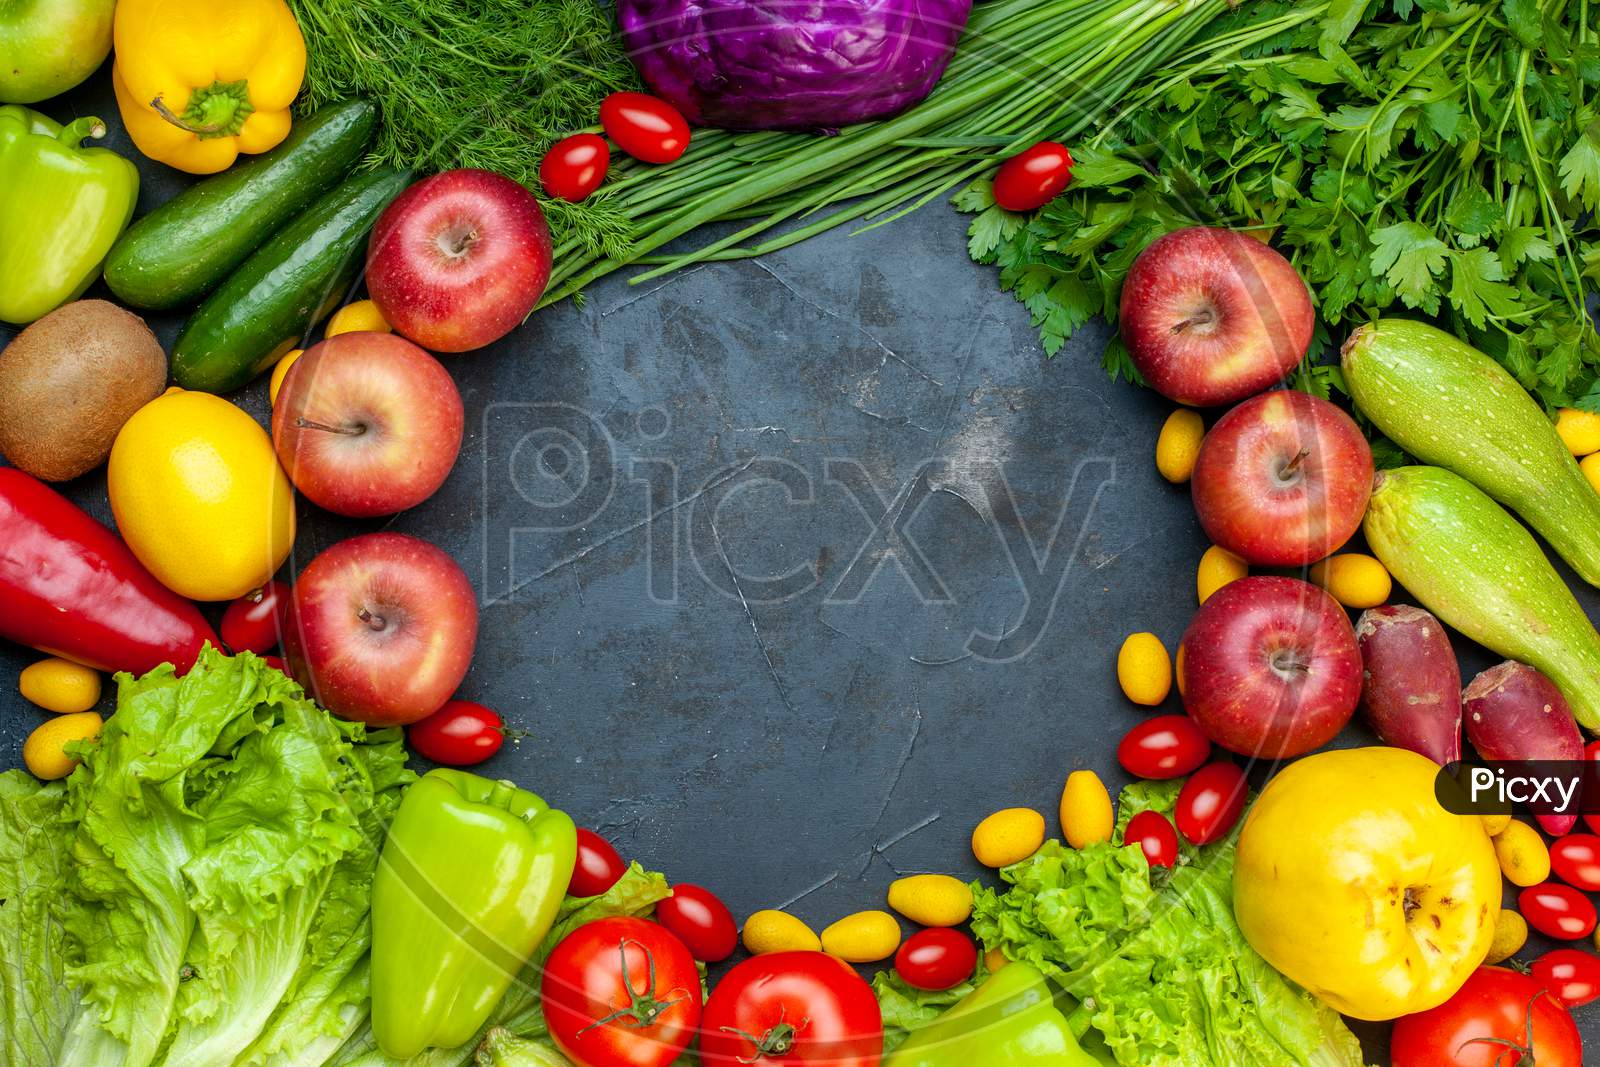 Top View Vegetables And Fruits Lettuce Tomatoes Cucumber Dill Cherry Tomatoes Zucchini Green Onion Parsley Apple Lemon Kiwi Free Space In Center